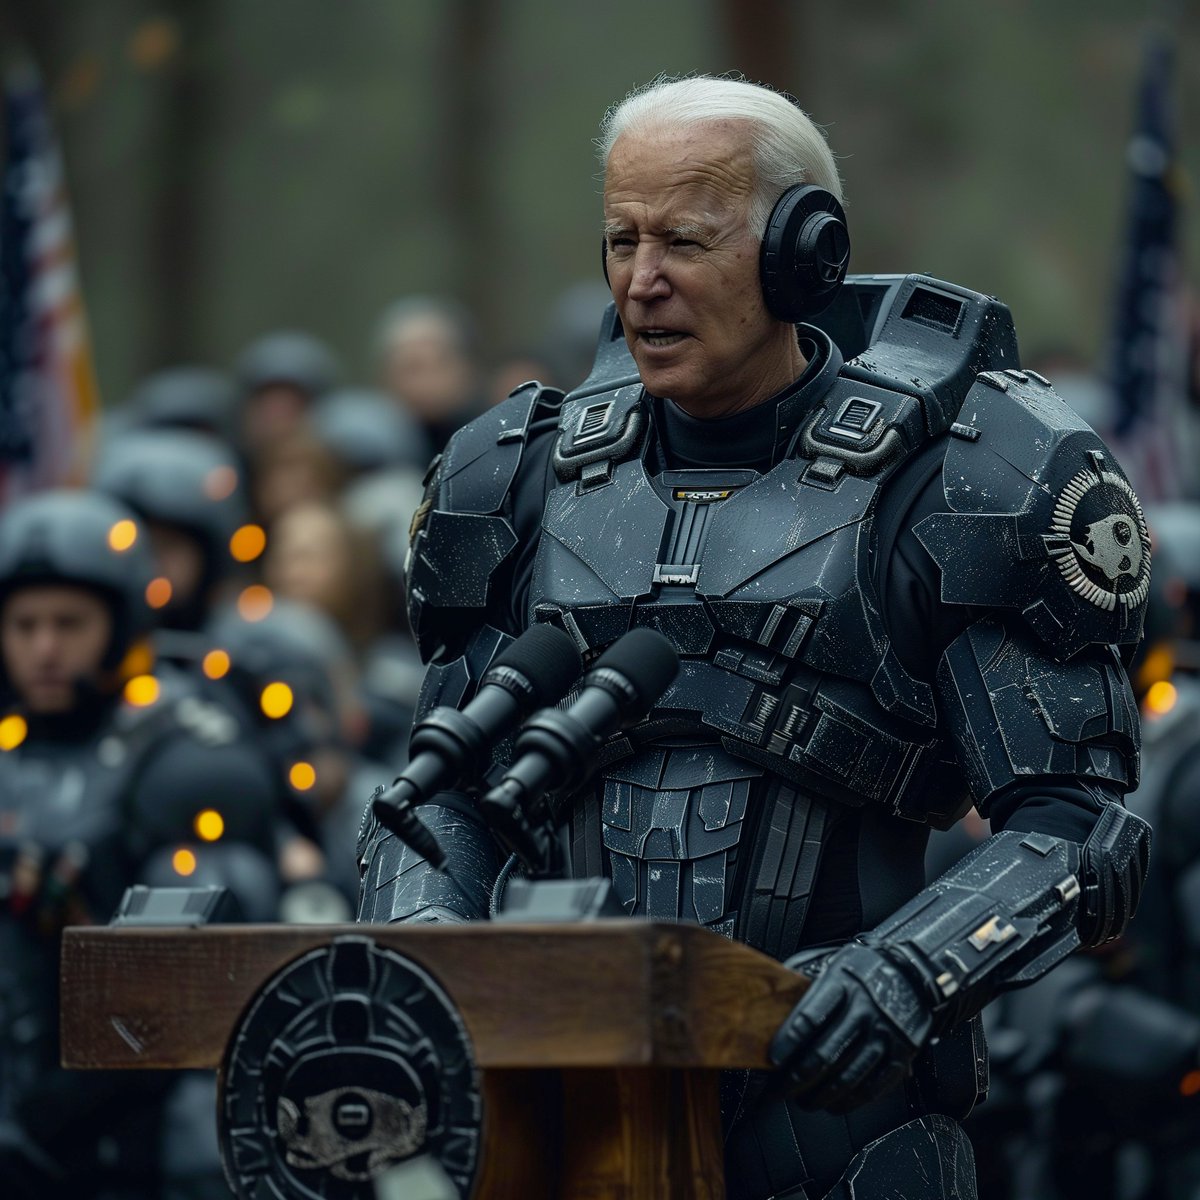 Eternal Leader Joseph Biden gave a speech to the Space Force crew before the carrier's maiden voyage: 'Folks, standing here today, with the crew, you know, it takes me back. Back to '83, there was this sailor I met, sharp as a tack, in Wilmington. His name was Timmy, or Tony,…